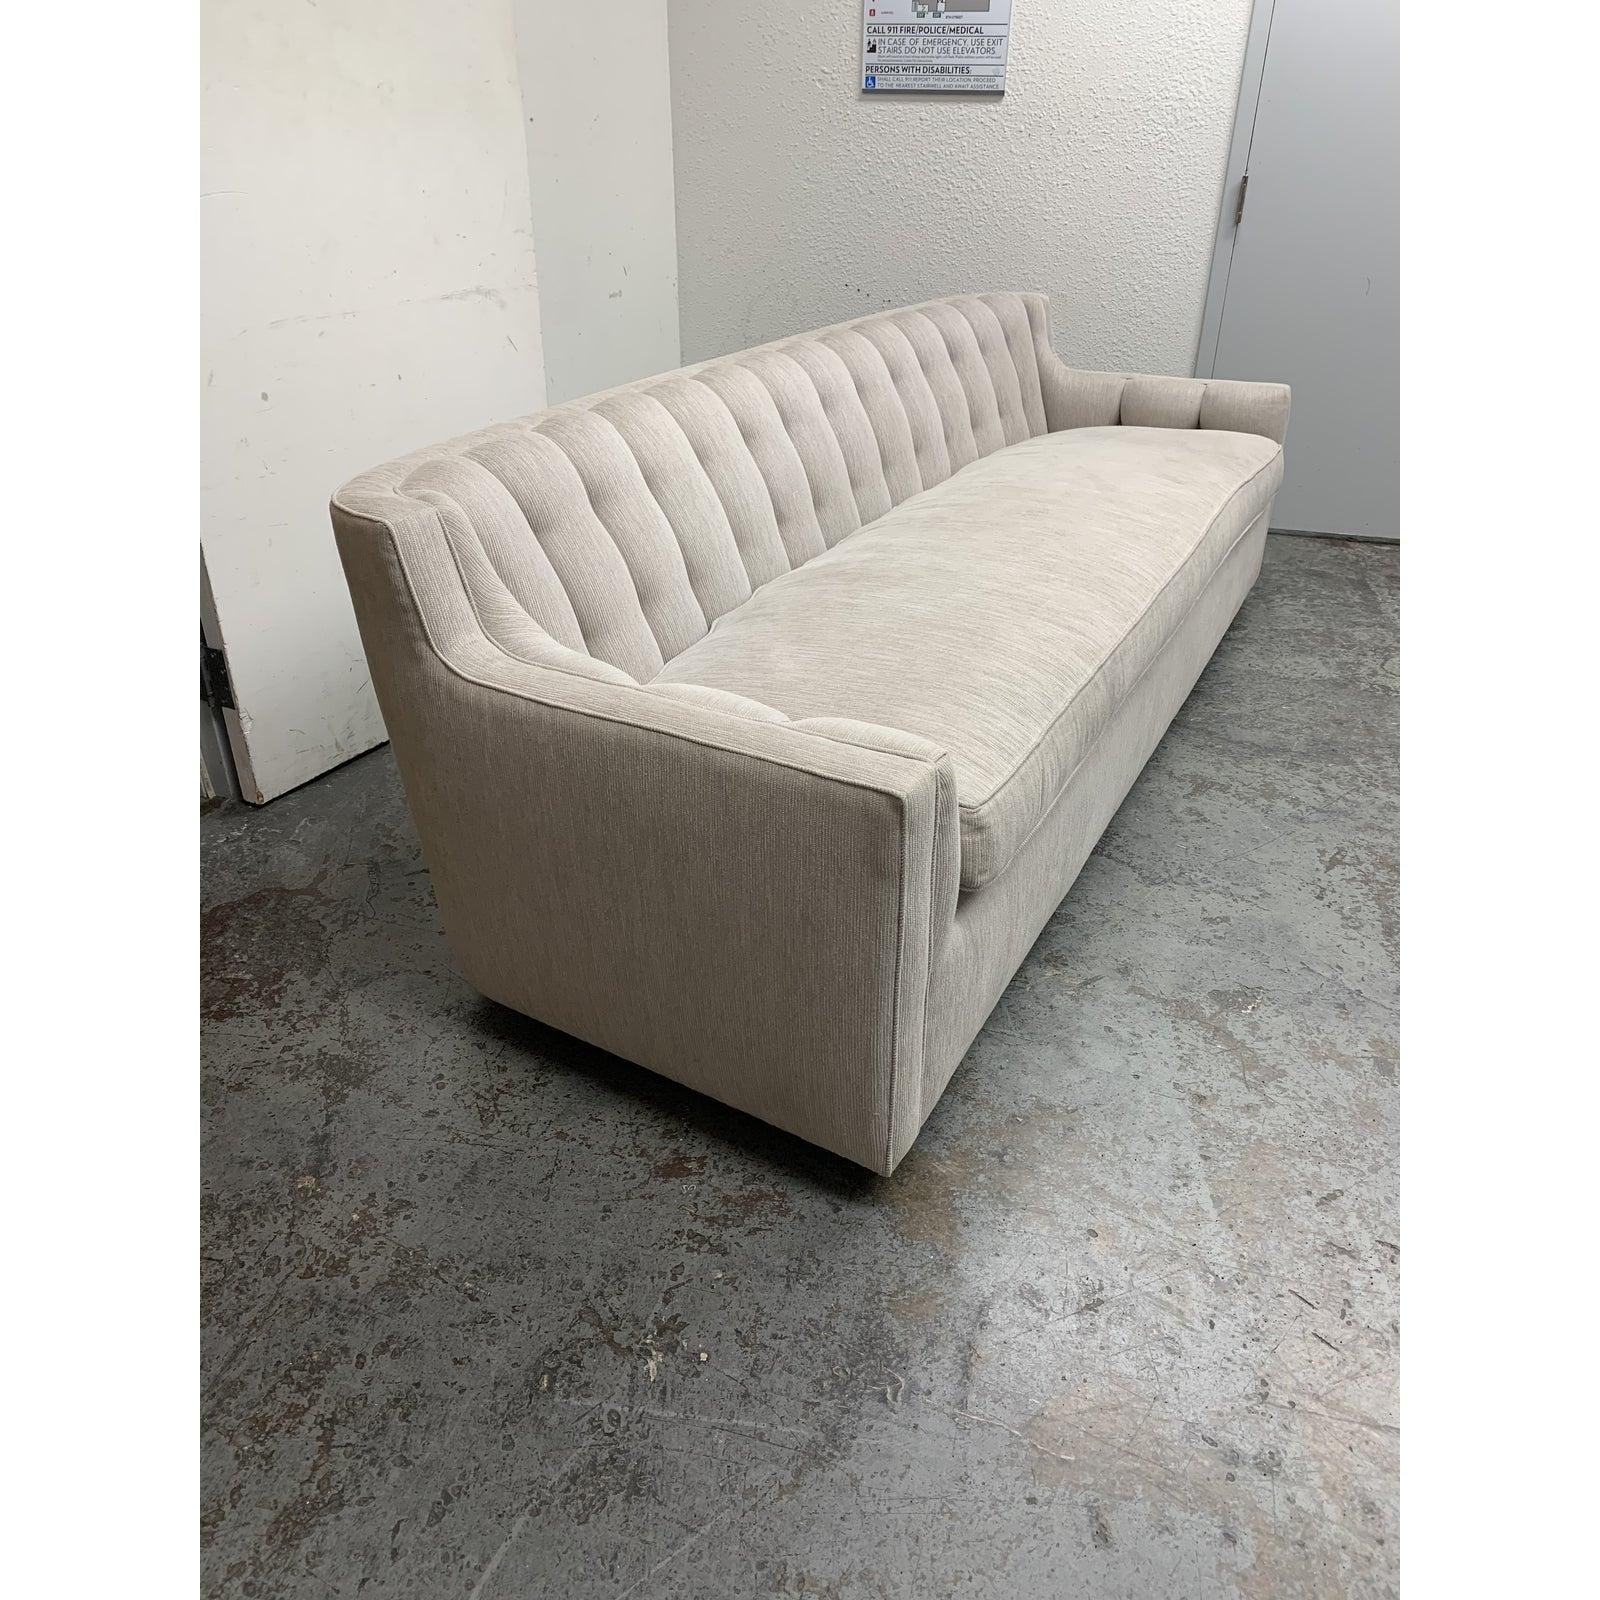 Presents a custom tufted shell slope arm sofa. Tufted and channeled upholstery line the low sculptural back. Firm back fabrication is nicely balanced with down filled bench seat. Bench seat is cut to fit the channeled upholstery on back. Fabric is a